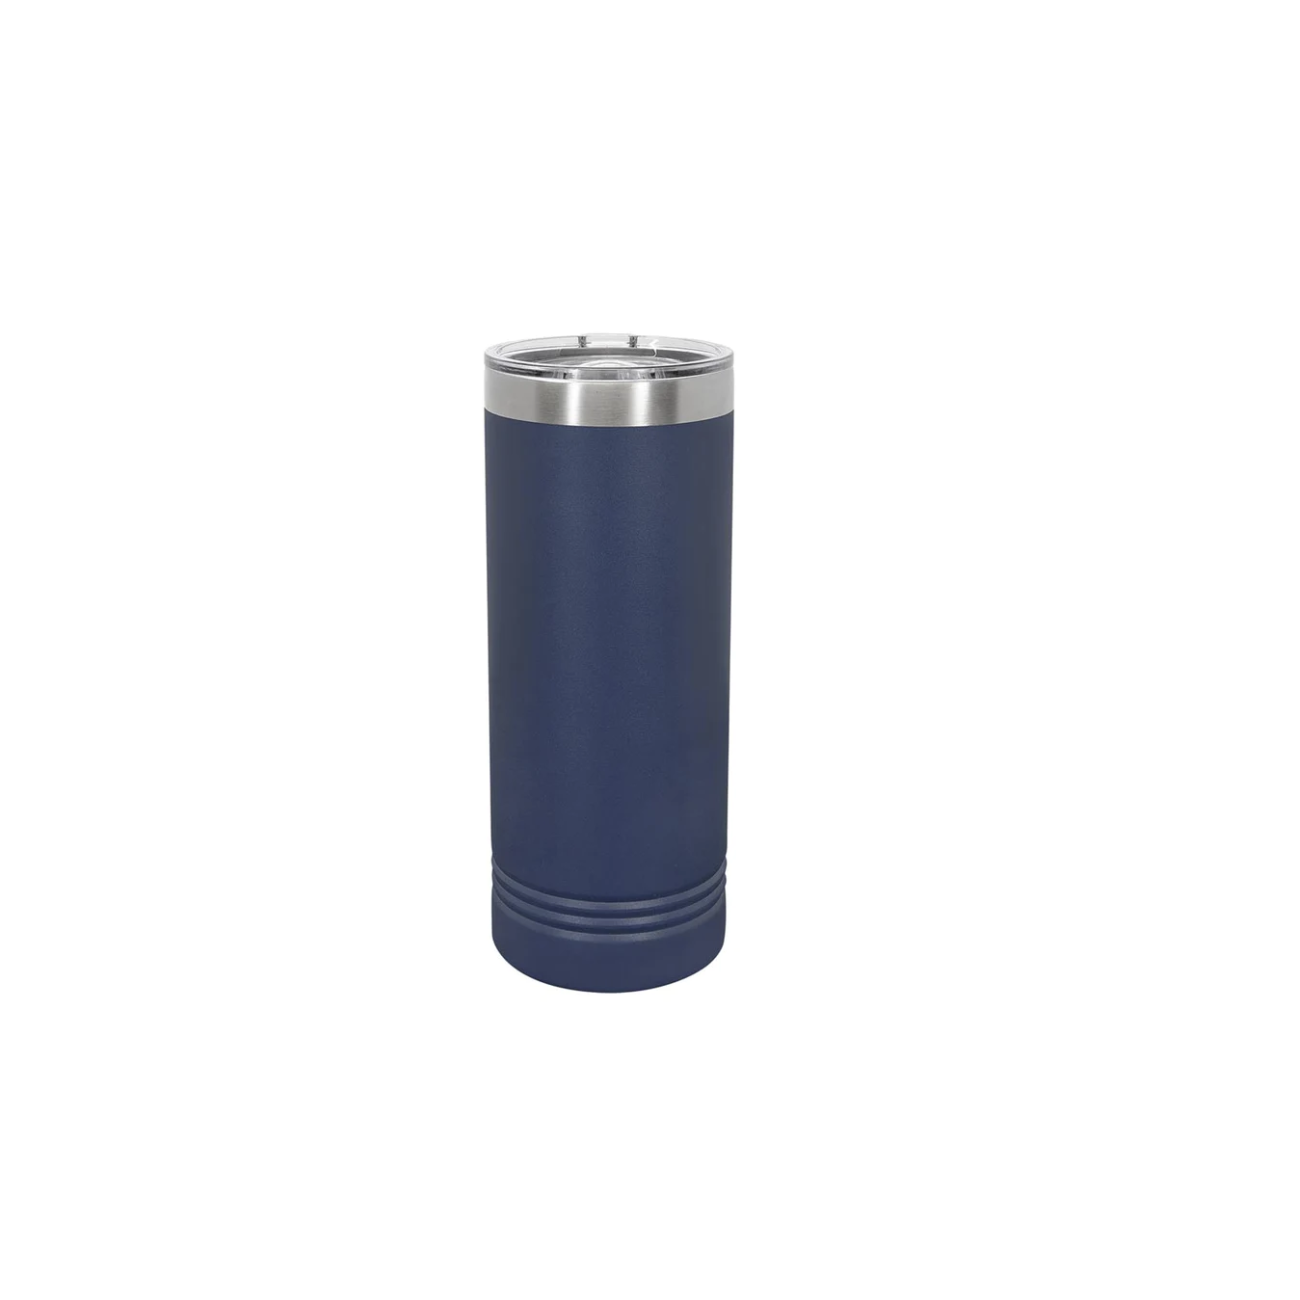 22 oz Skinny Coated Stainless Steel Tumbler - Includes One Location Laser Engraving